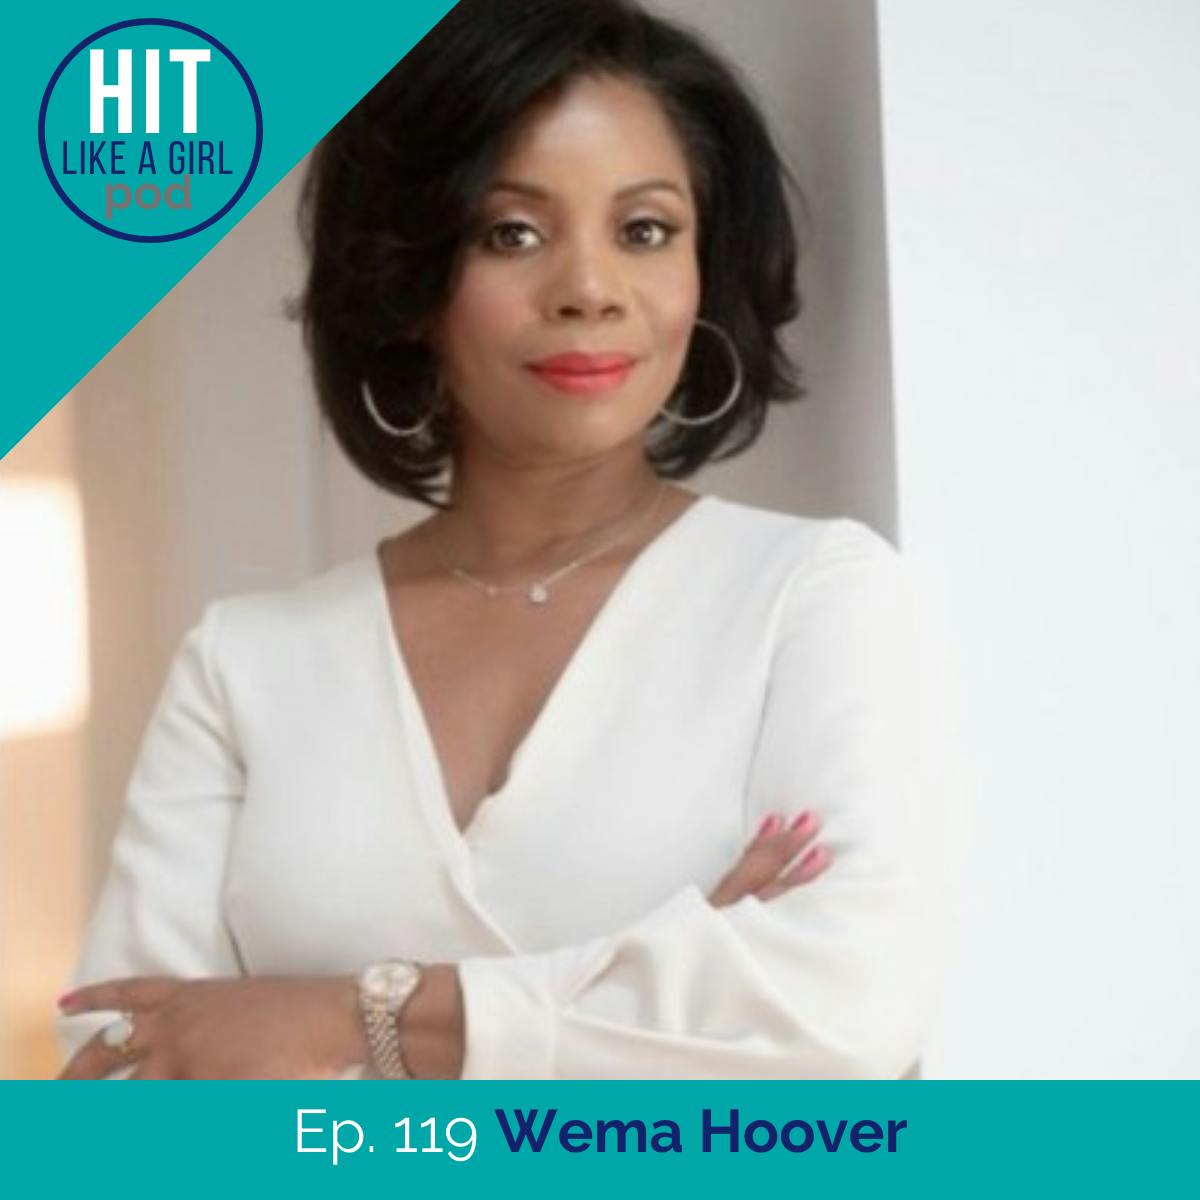 Wema Hoover tackles DEI and the importance of emotional intelligence in leadership